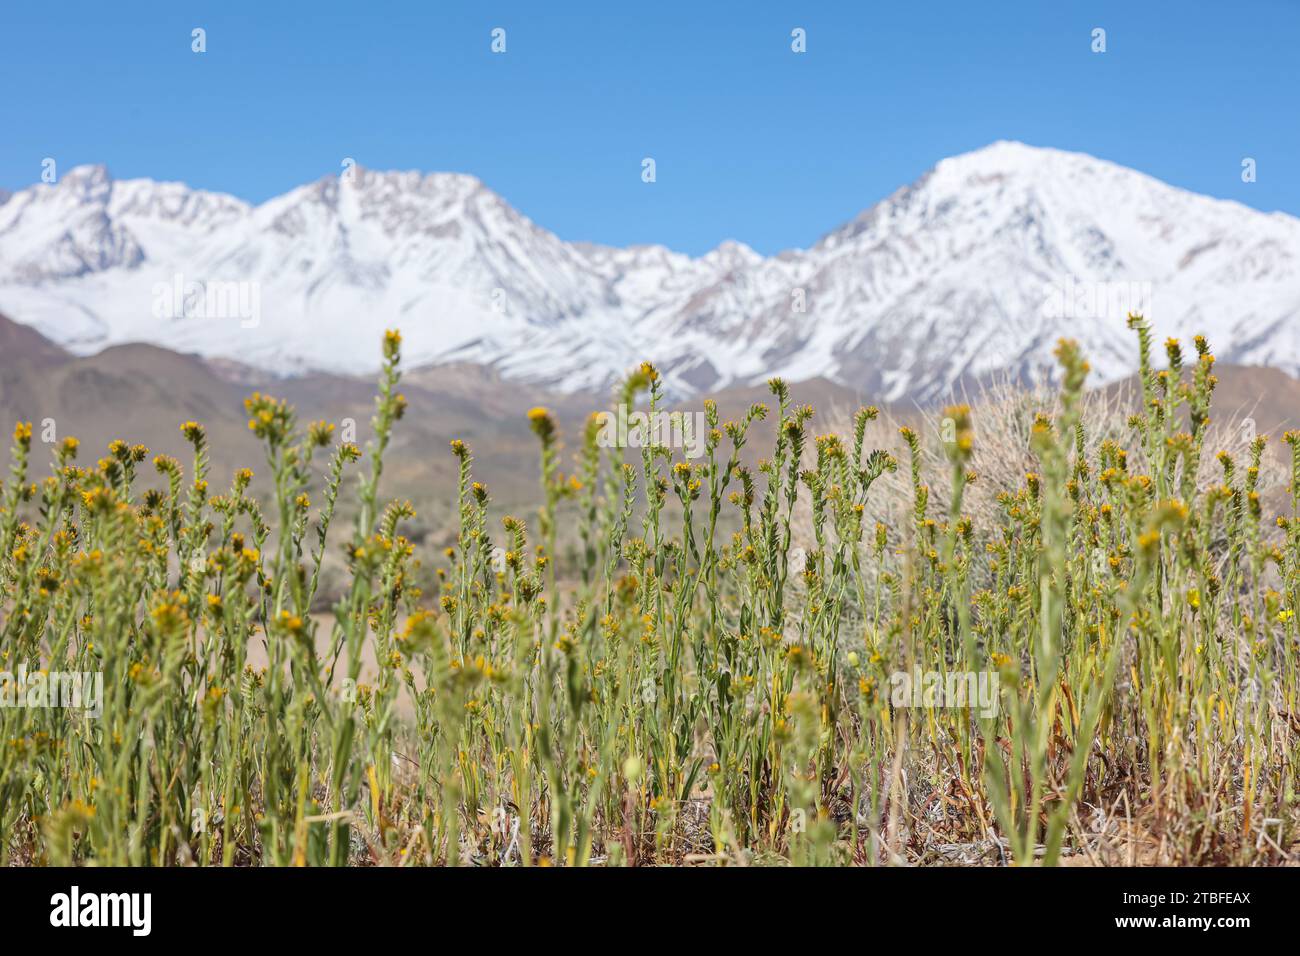 A scenic view of a mountainscape with snow-capped peaks and a foreground of small yellow wildflowers in the Eastern Sierra region of California Stock Photo